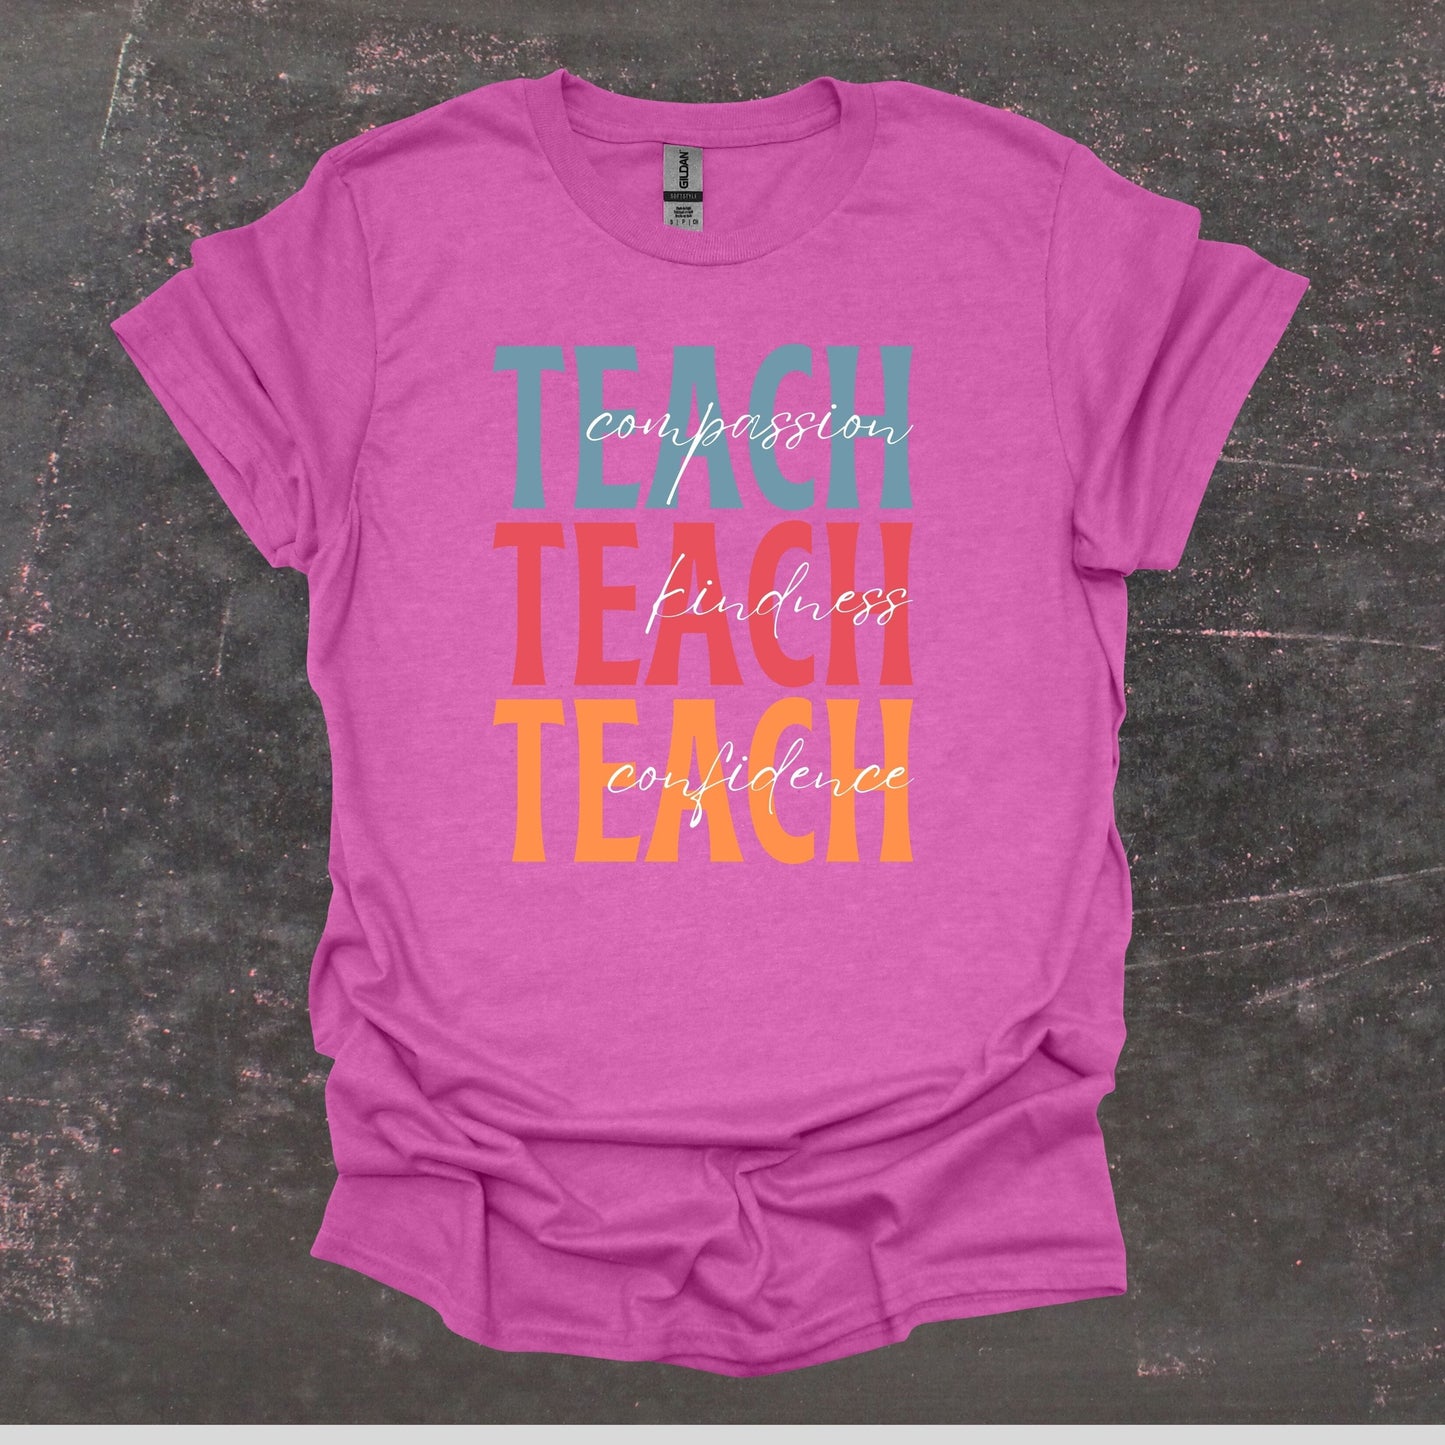 Teach Compassion Kindness Confidence - Teacher T Shirt - Adult Tee Shirts T-Shirts Graphic Avenue Heather Berry Adult Small 